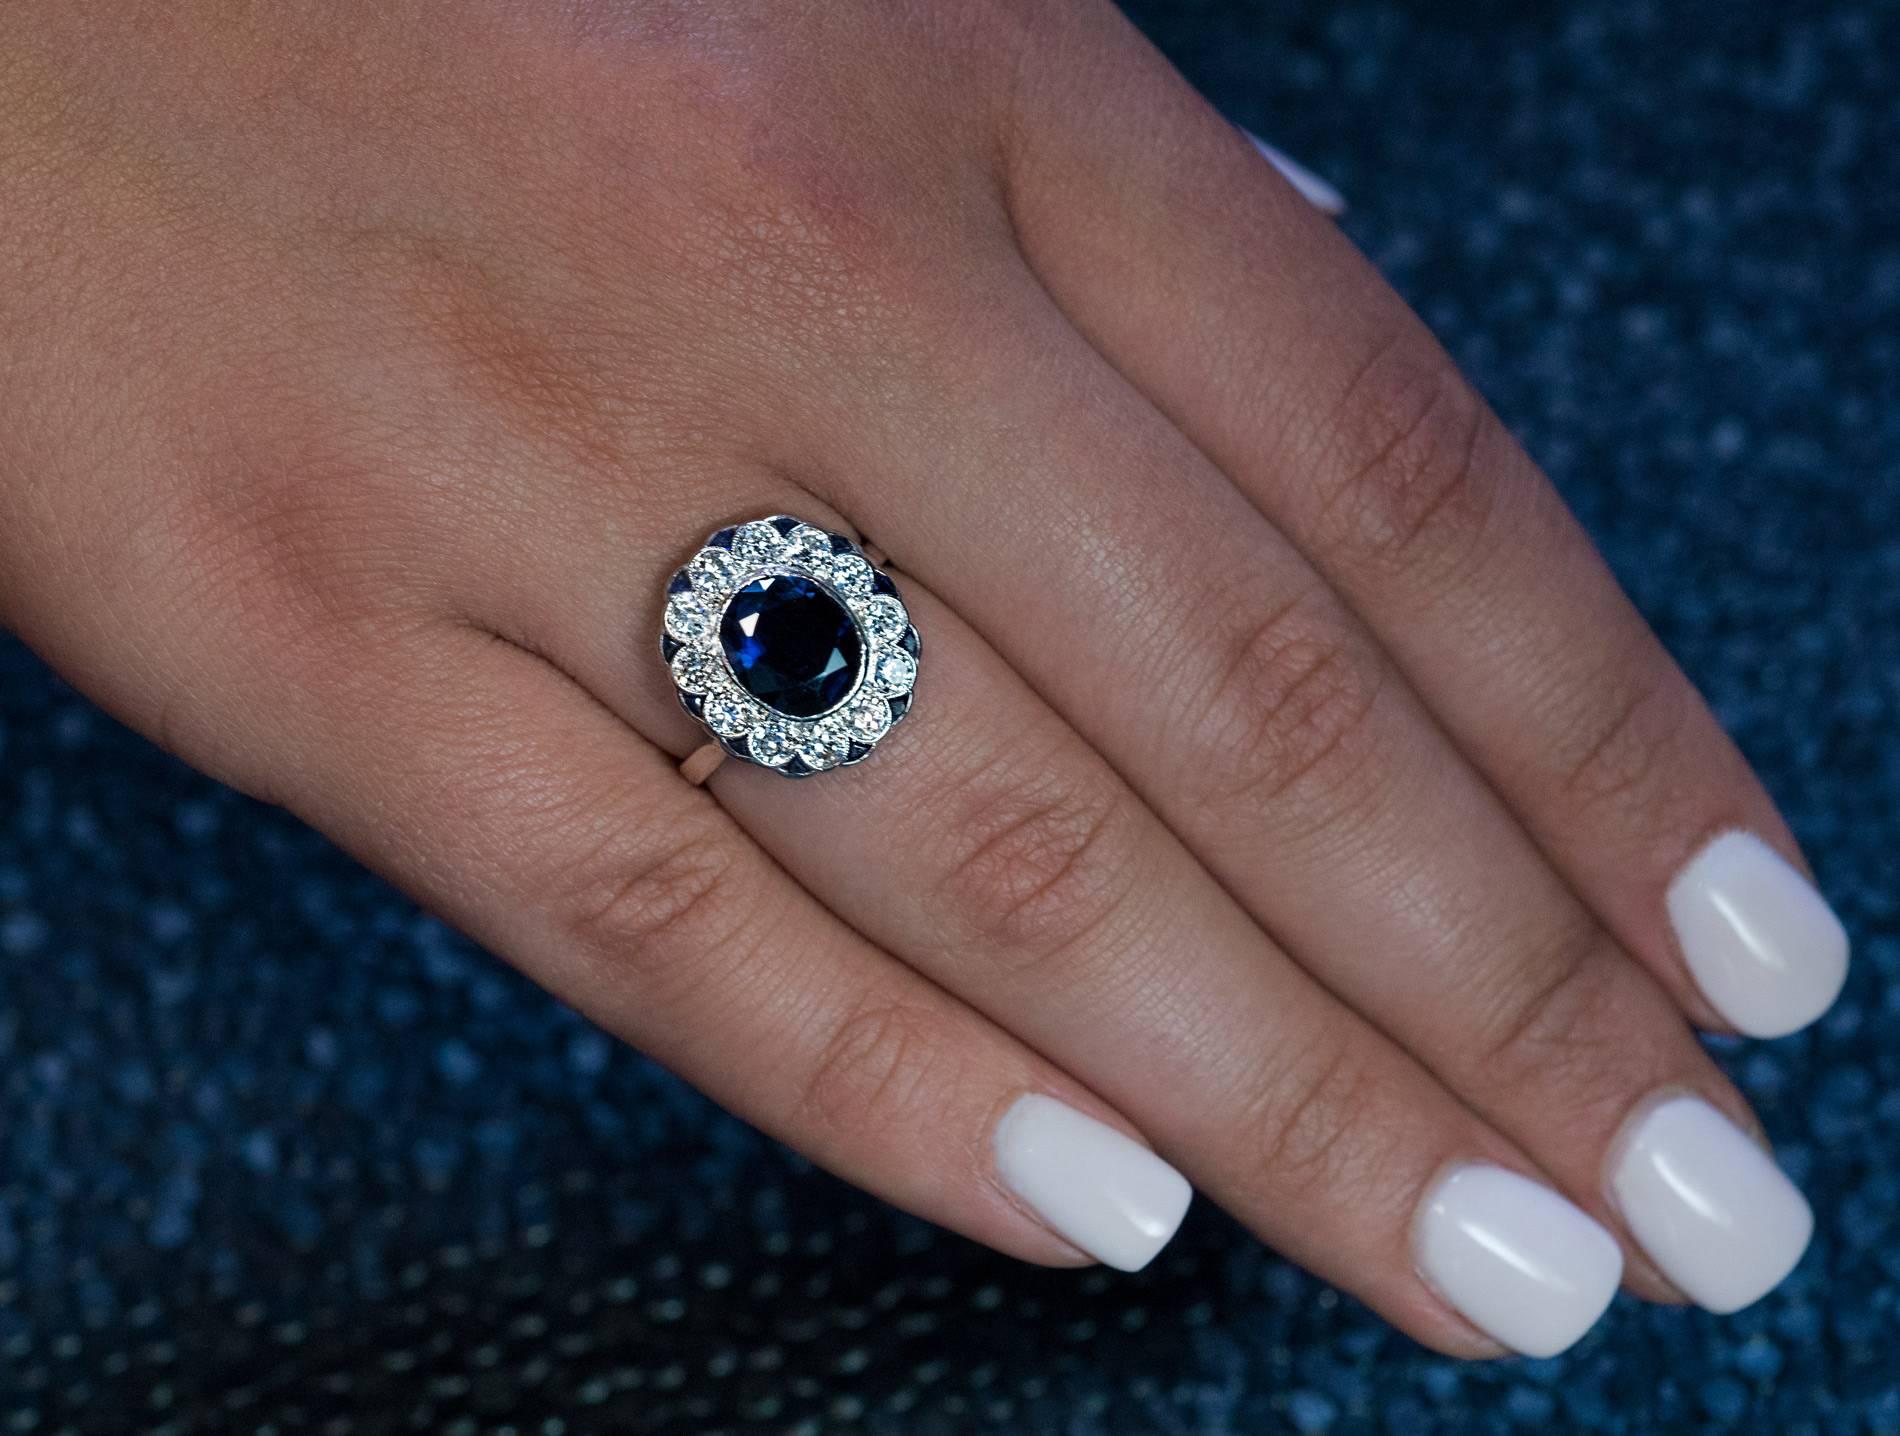 Circa 1950s
The 14K white gold ring is centered with a bezel set natural sapphire (9.2 x 7.8 x 4.6 mm, approximately 2.64 ct) surrounded by 12 bright white brilliant cut diamonds (F-G color, VS2-SI2 clarity), in turn, outlined by calibre cut